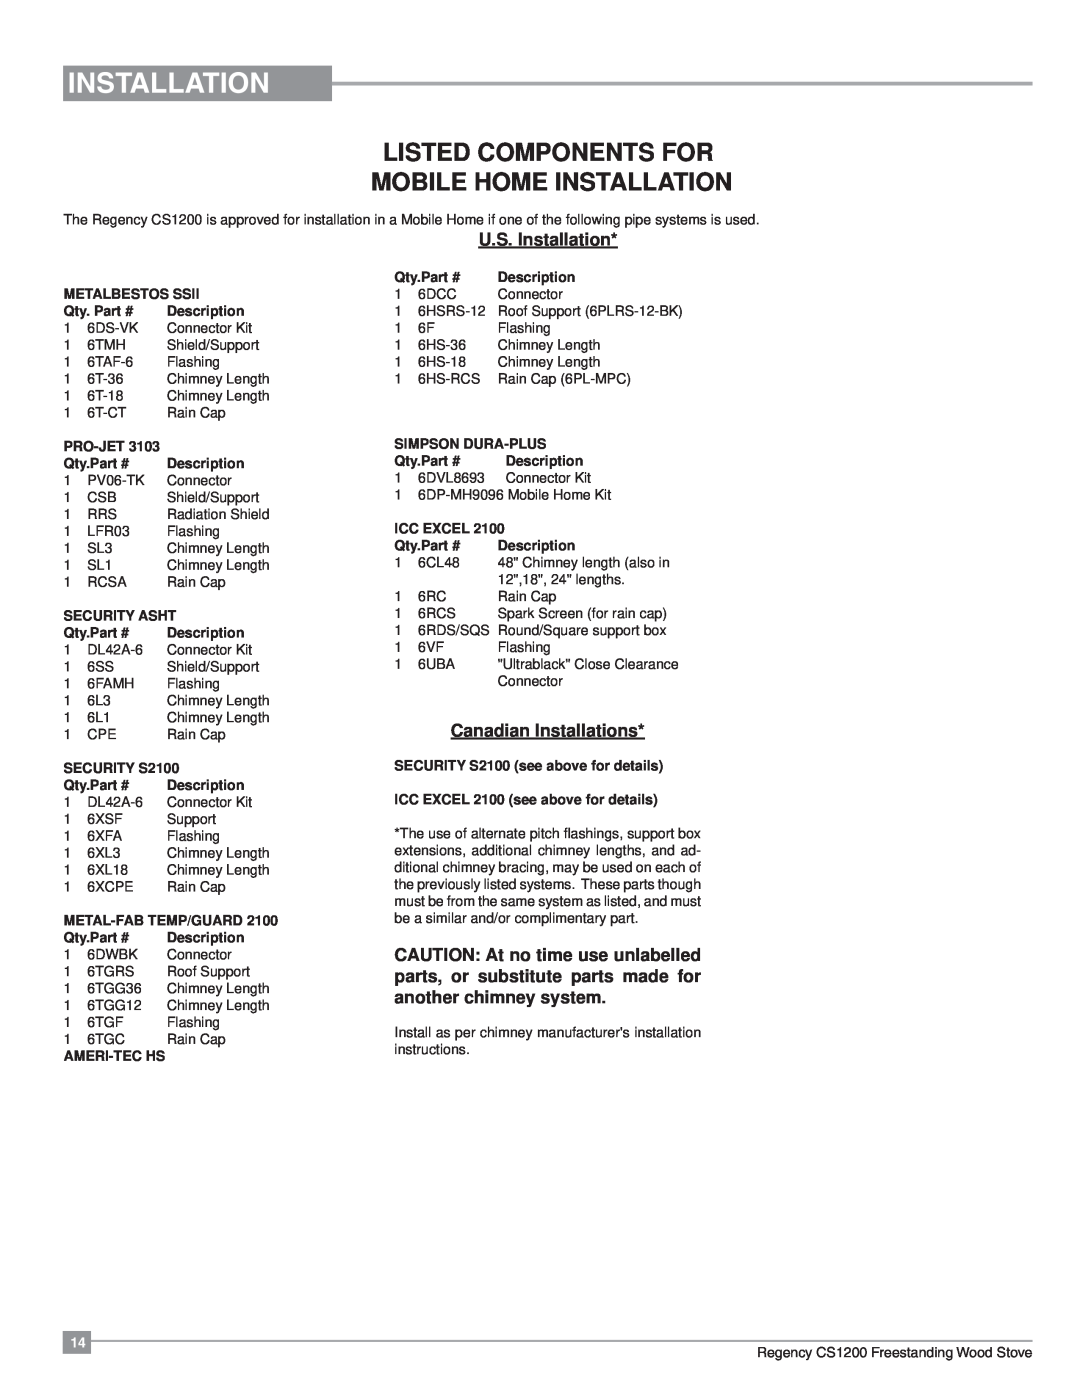 Regency CS1200 Listed Components For Mobile Home Installation, Metalbestos Ssii, Qty, Description, PRO-JET3103 